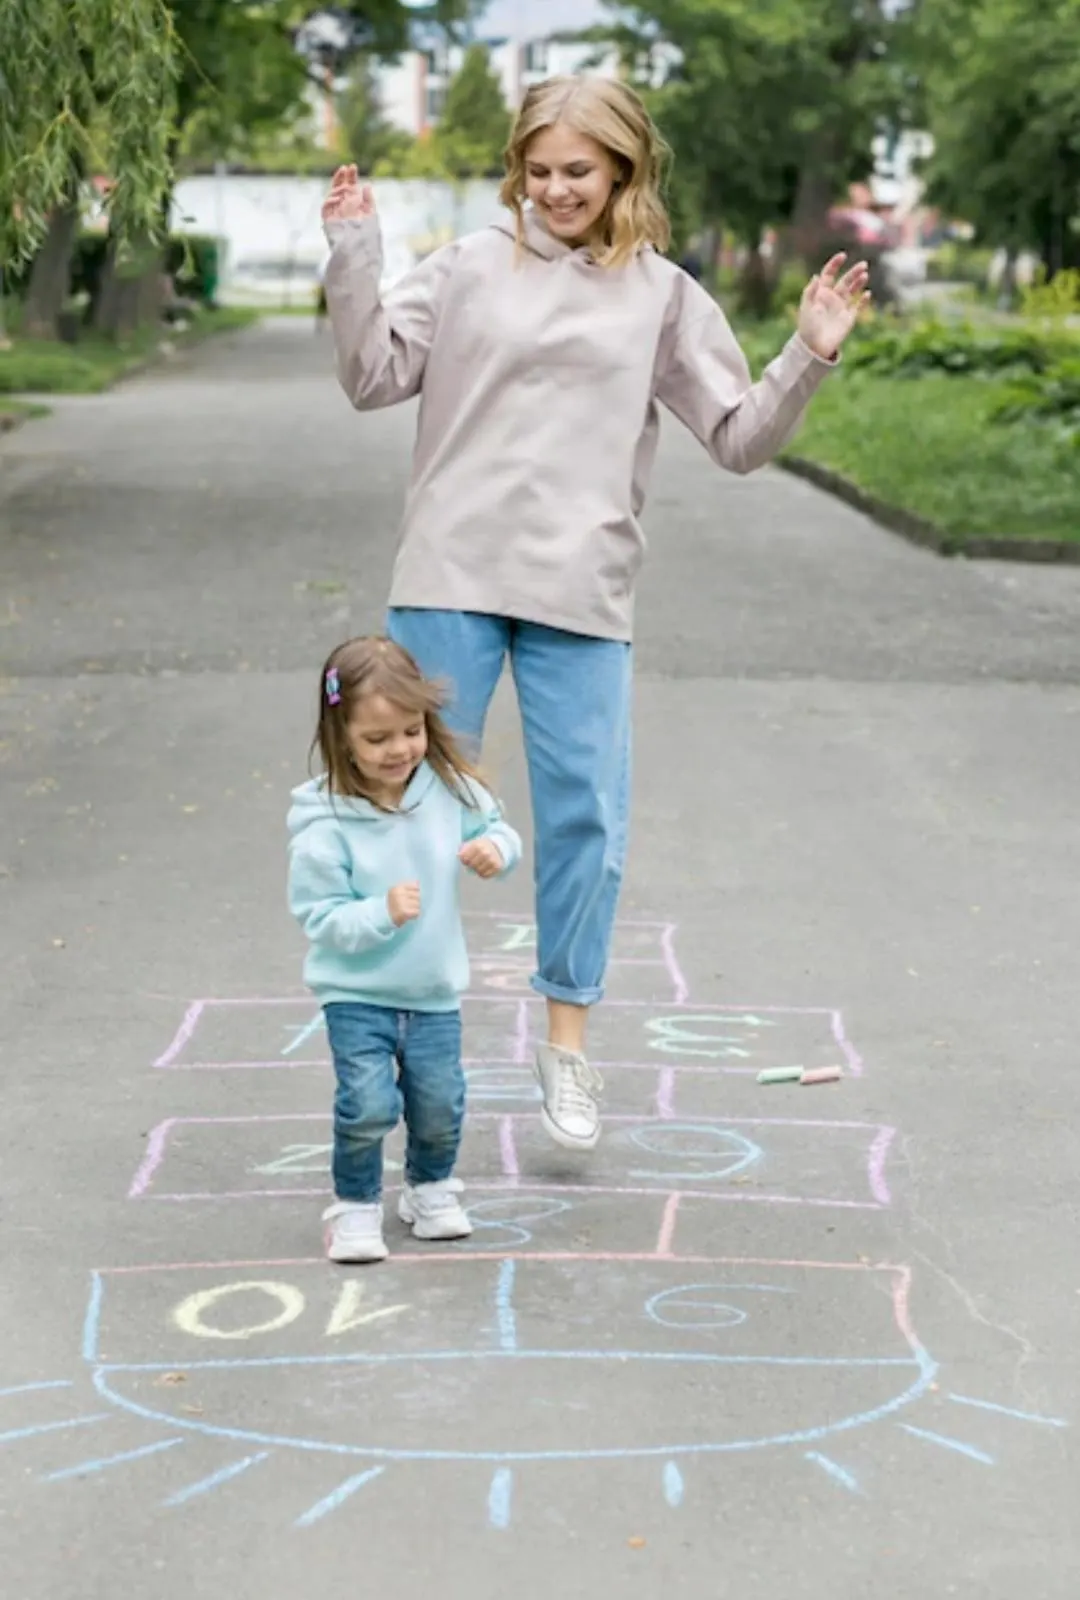 mom and daughter playing hopscotch